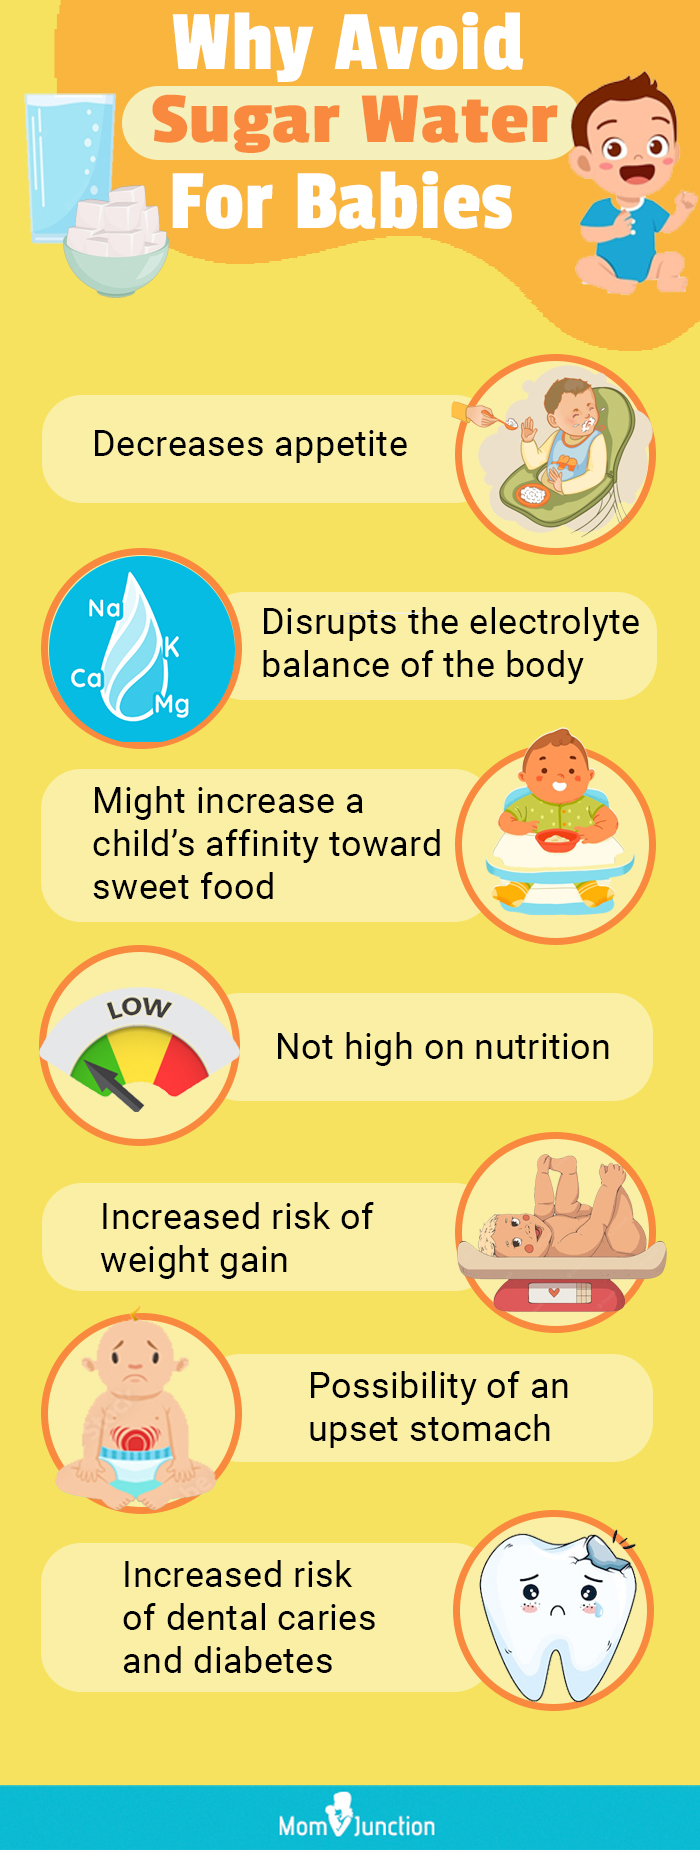 why avoid sugar water for babies (infographic)